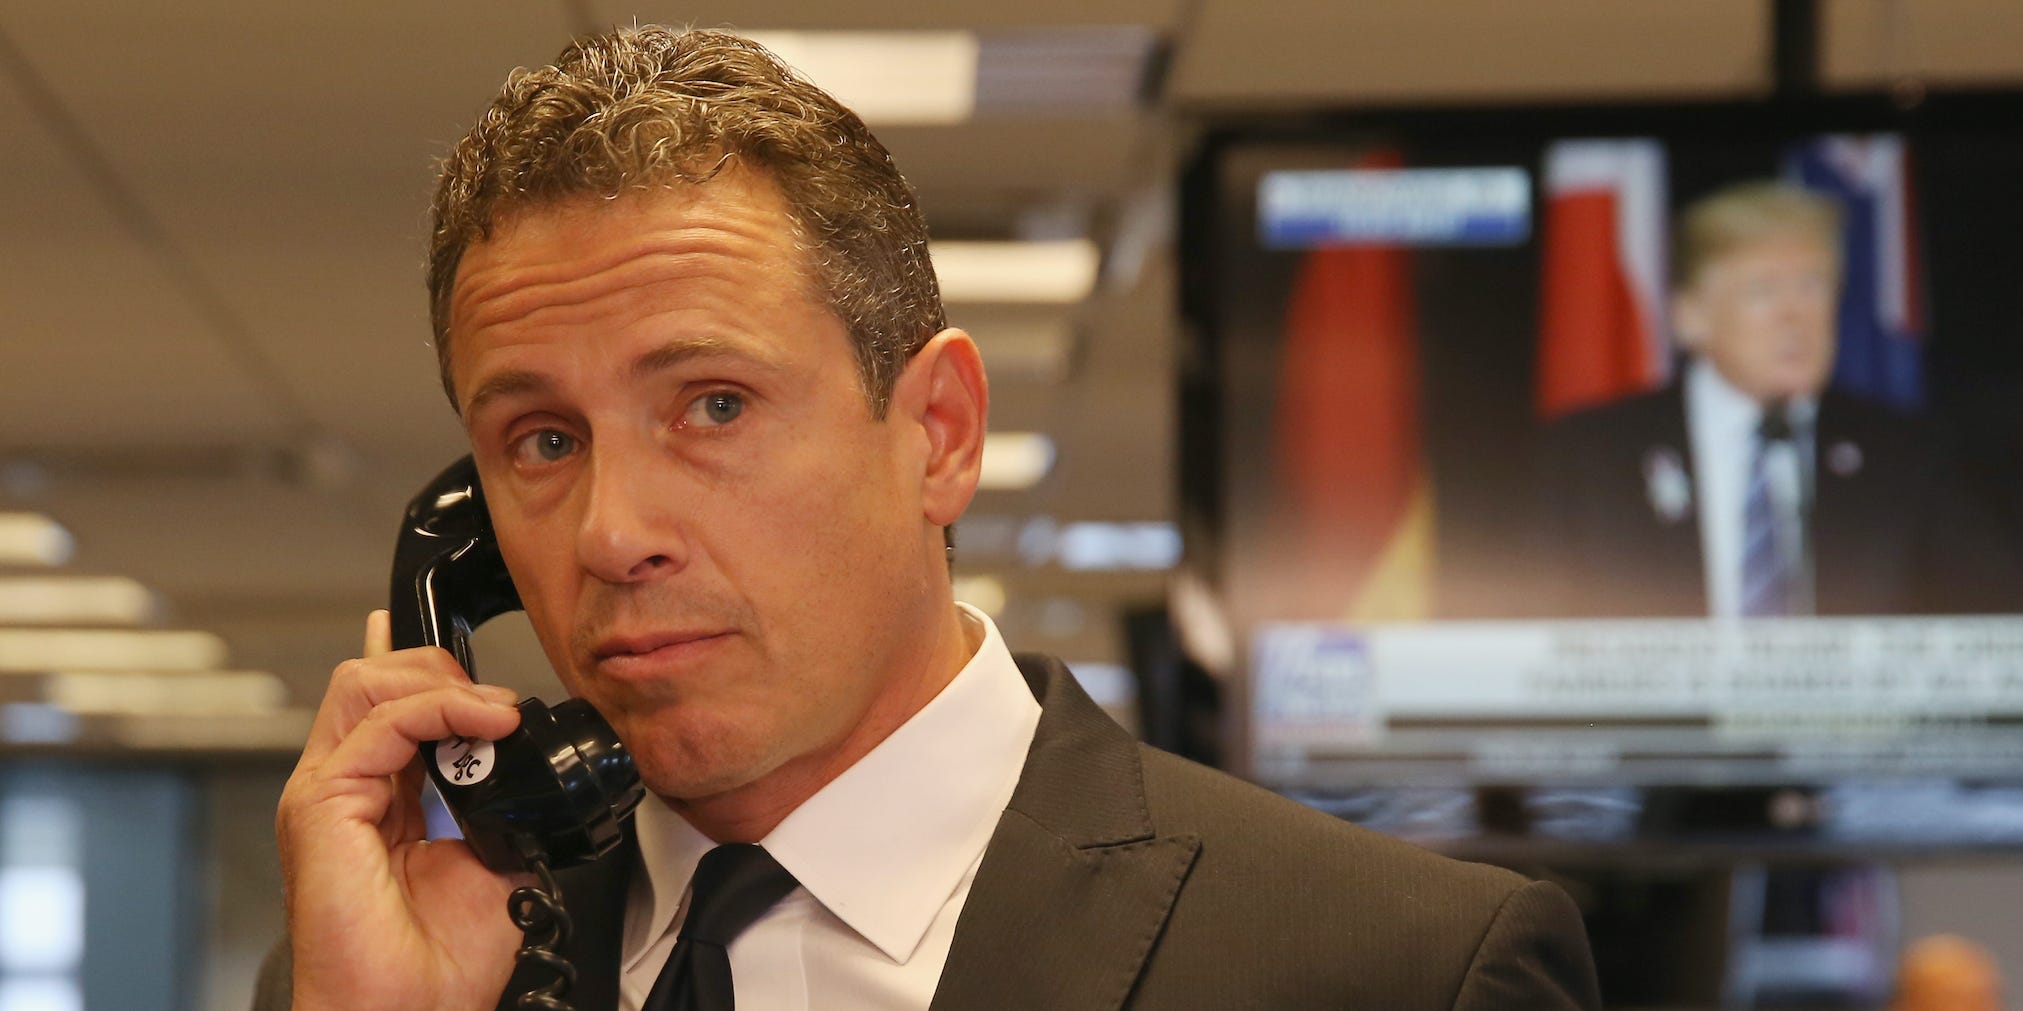 Chris Cuomo holds a landline phone to his ear, looking off to his left.